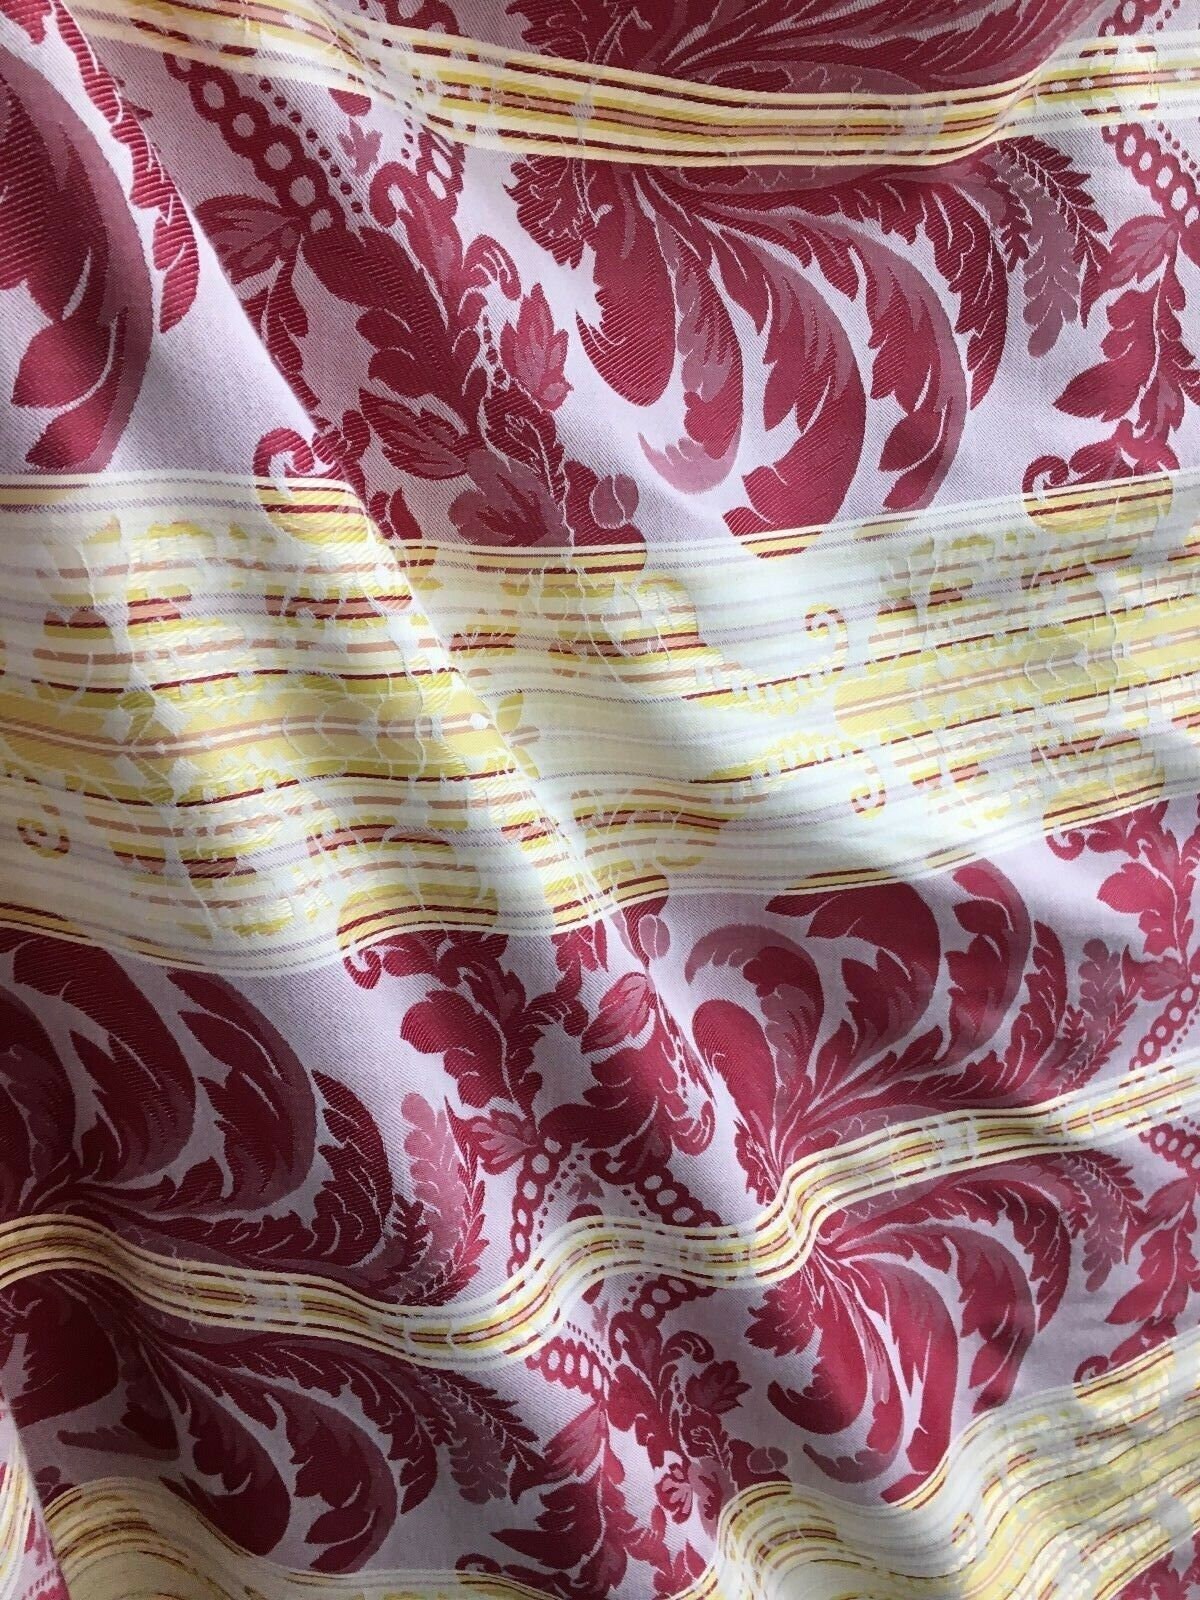 RED YELLOW Damask Striped Brocade Upholstery Drapery Fabric (54 in.) Sold By The Yard